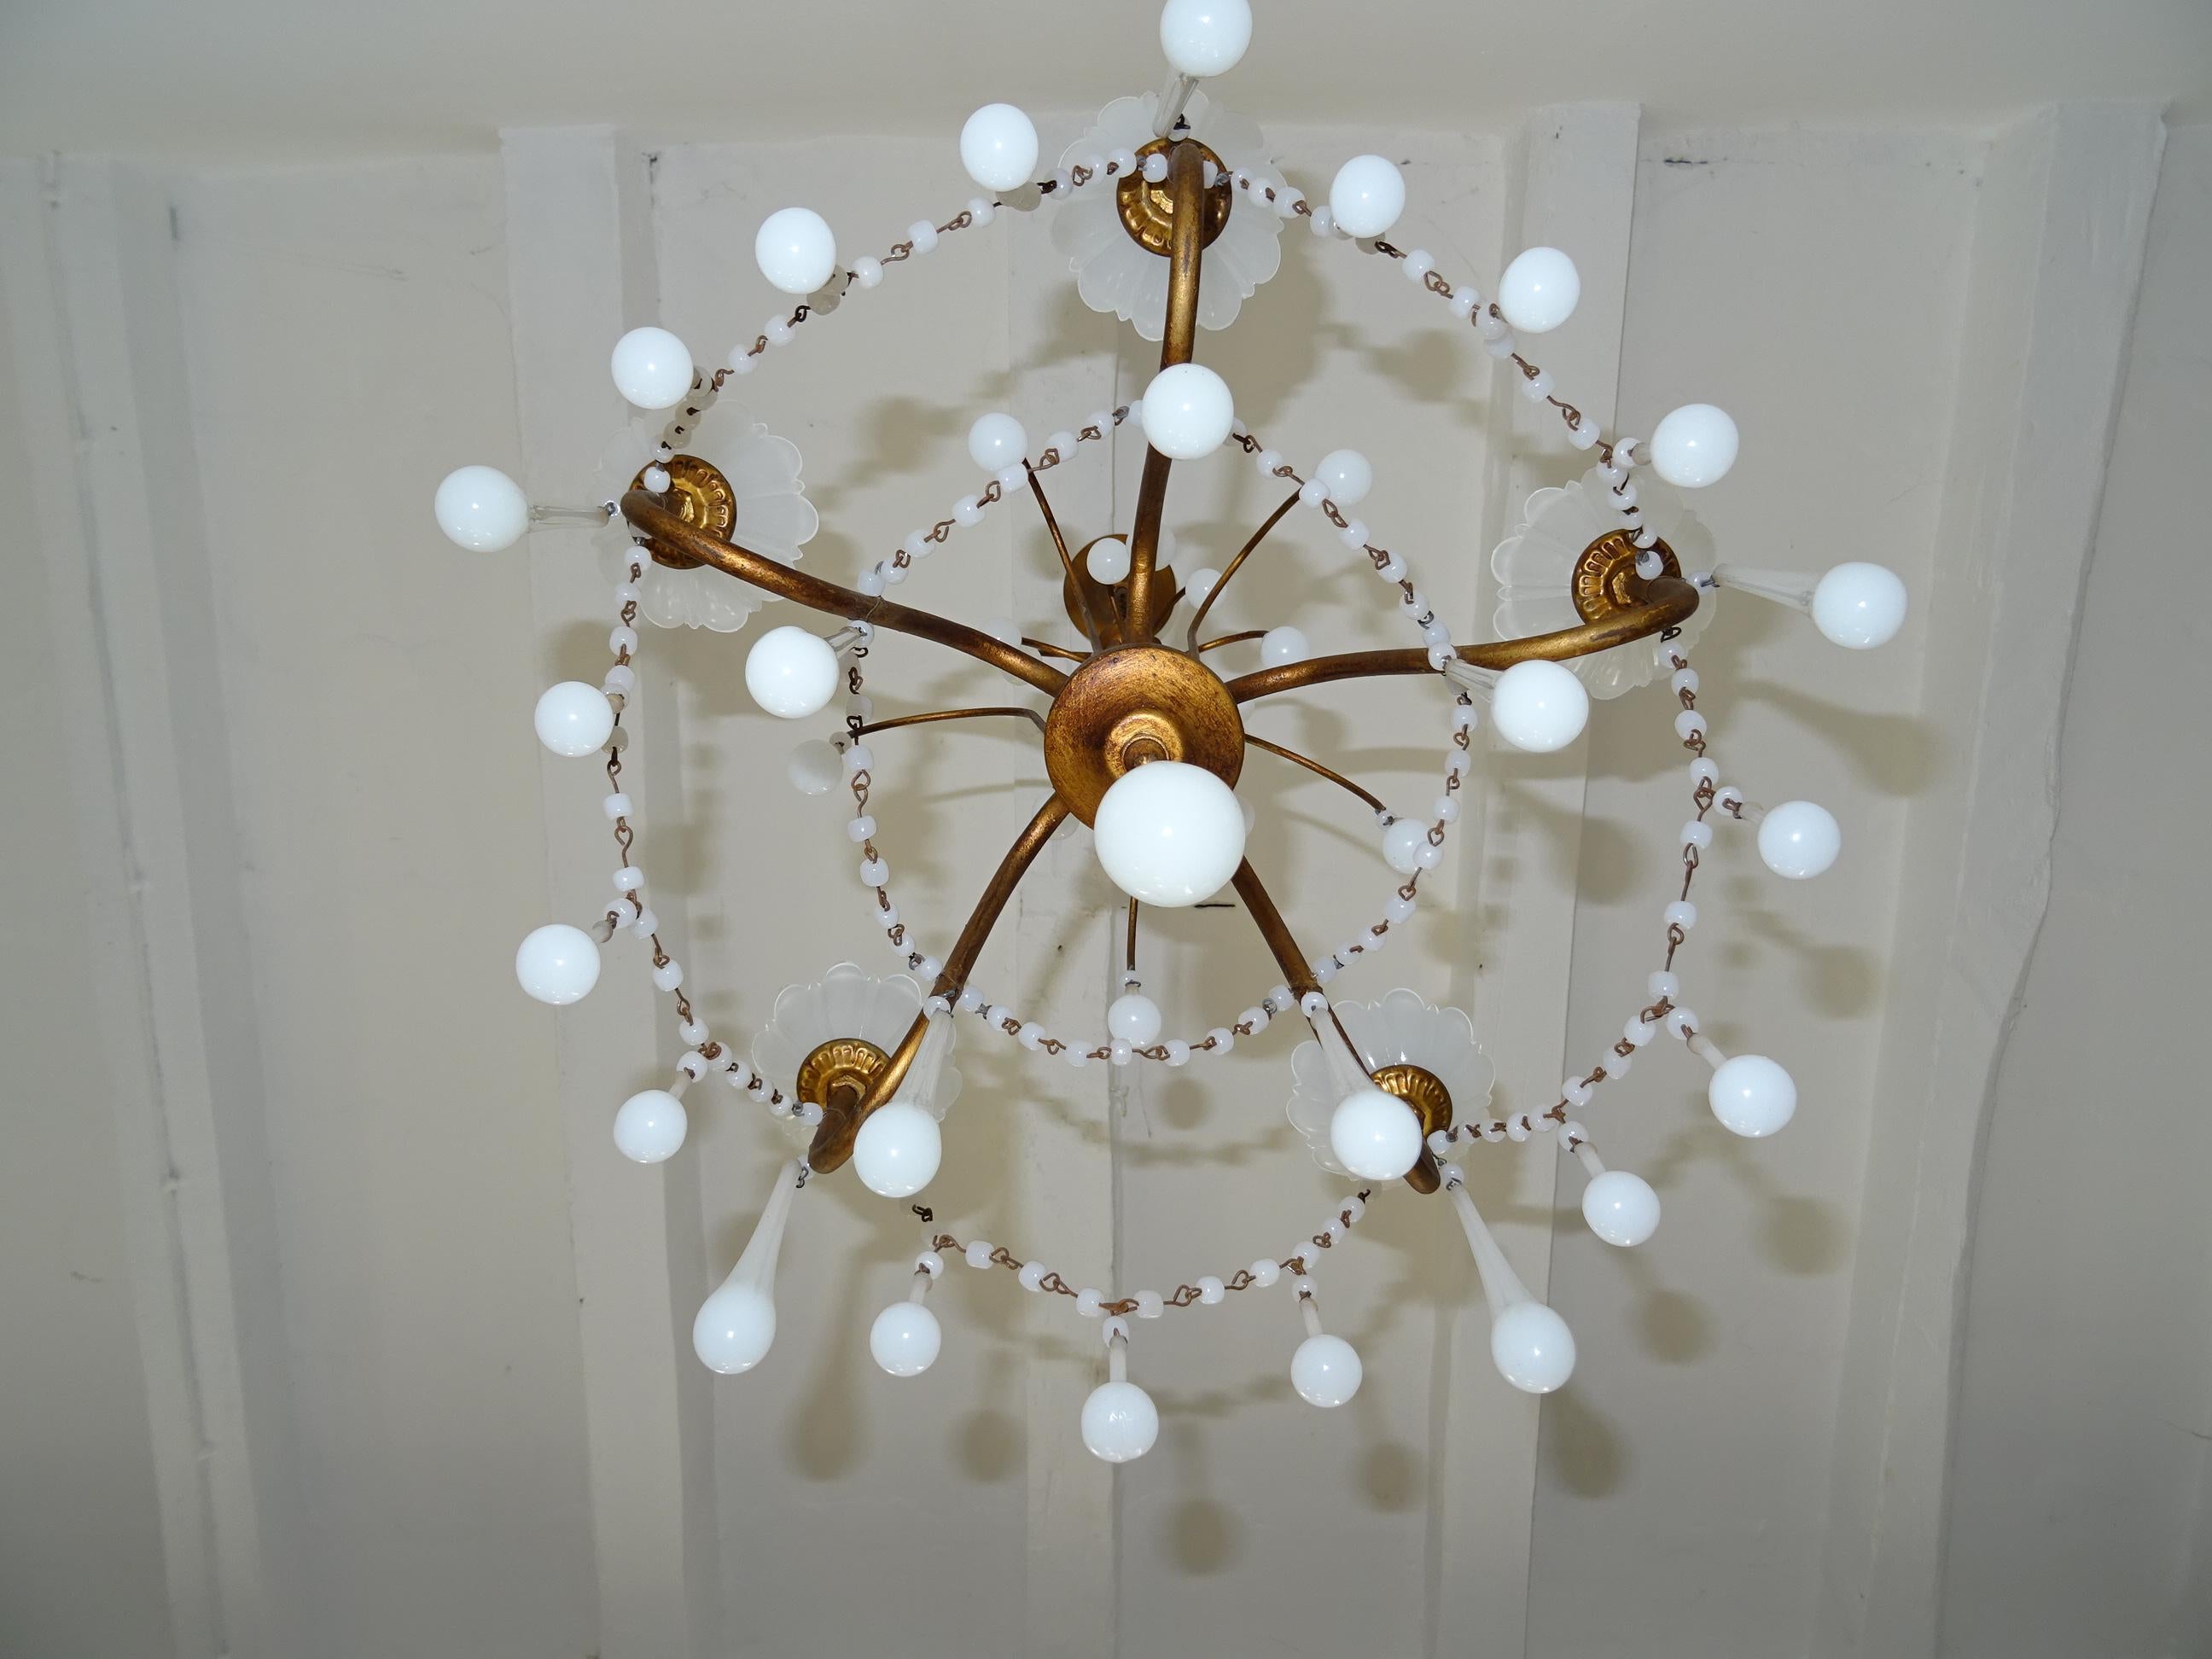 1930 French White Opaline Bobeches, Beads and Drops Chandelier For Sale 1